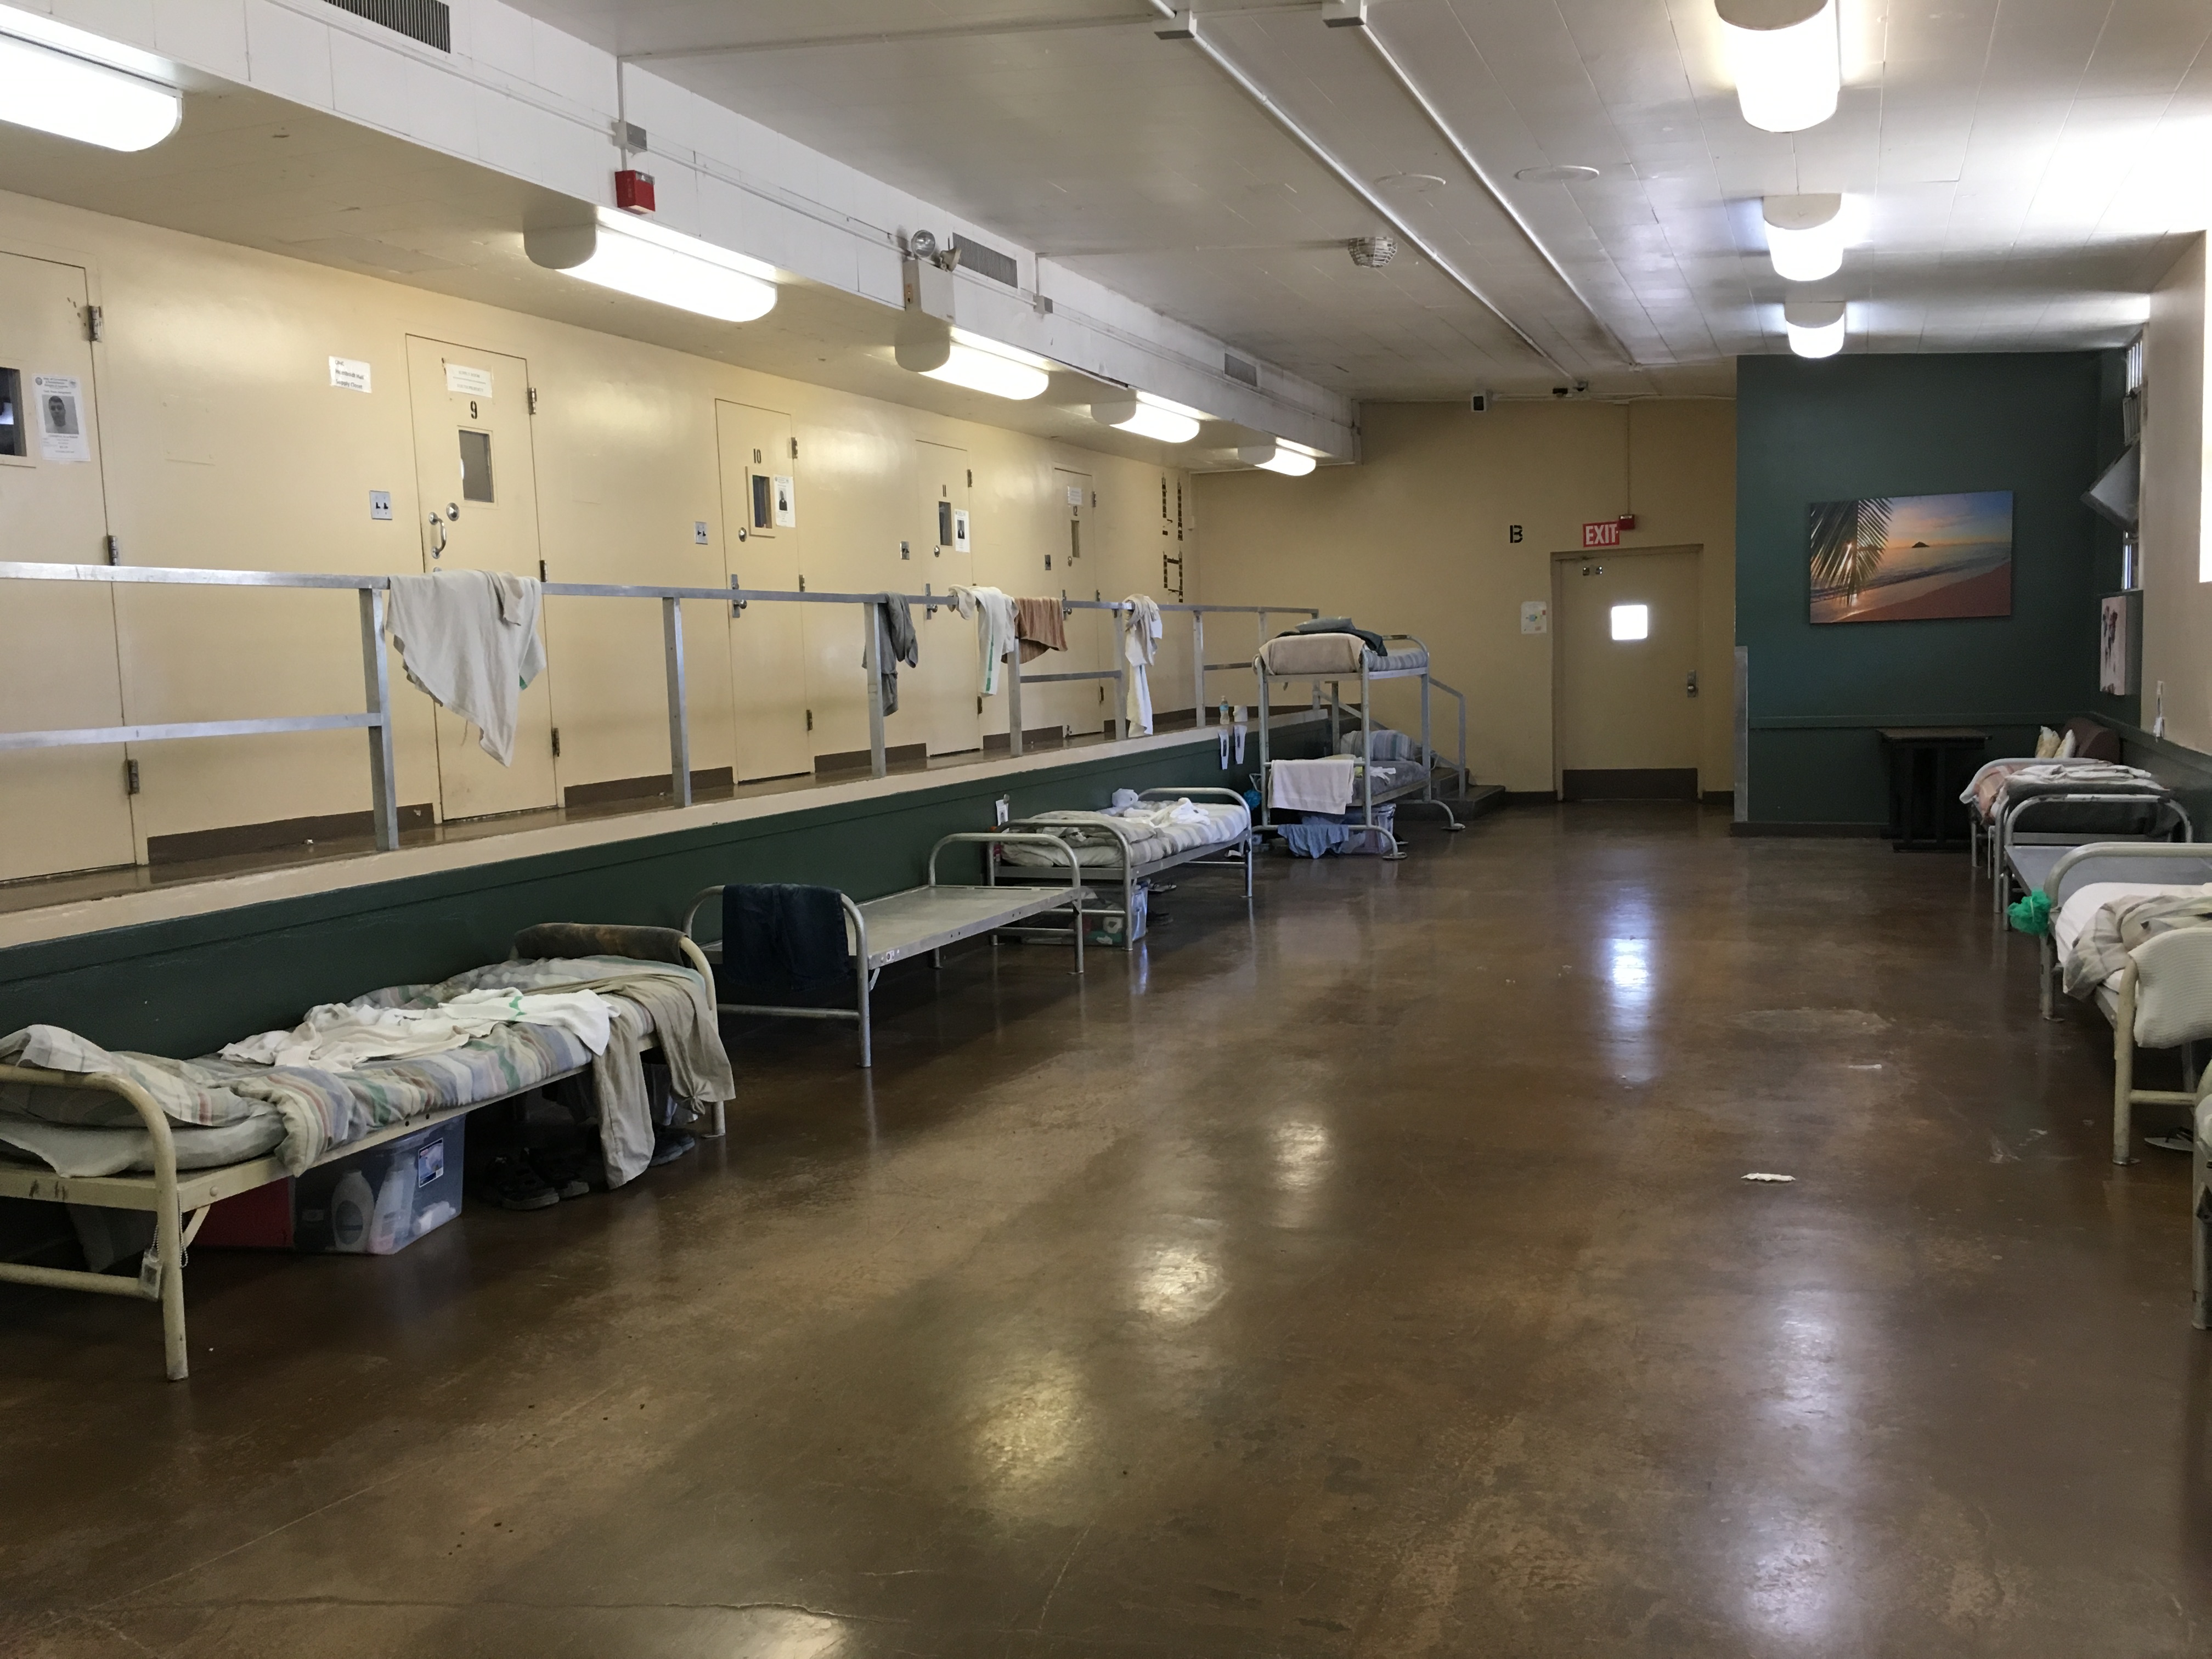 California Must Safeguard Youth in State Facilities Amid New COVID-19 Outbreaks